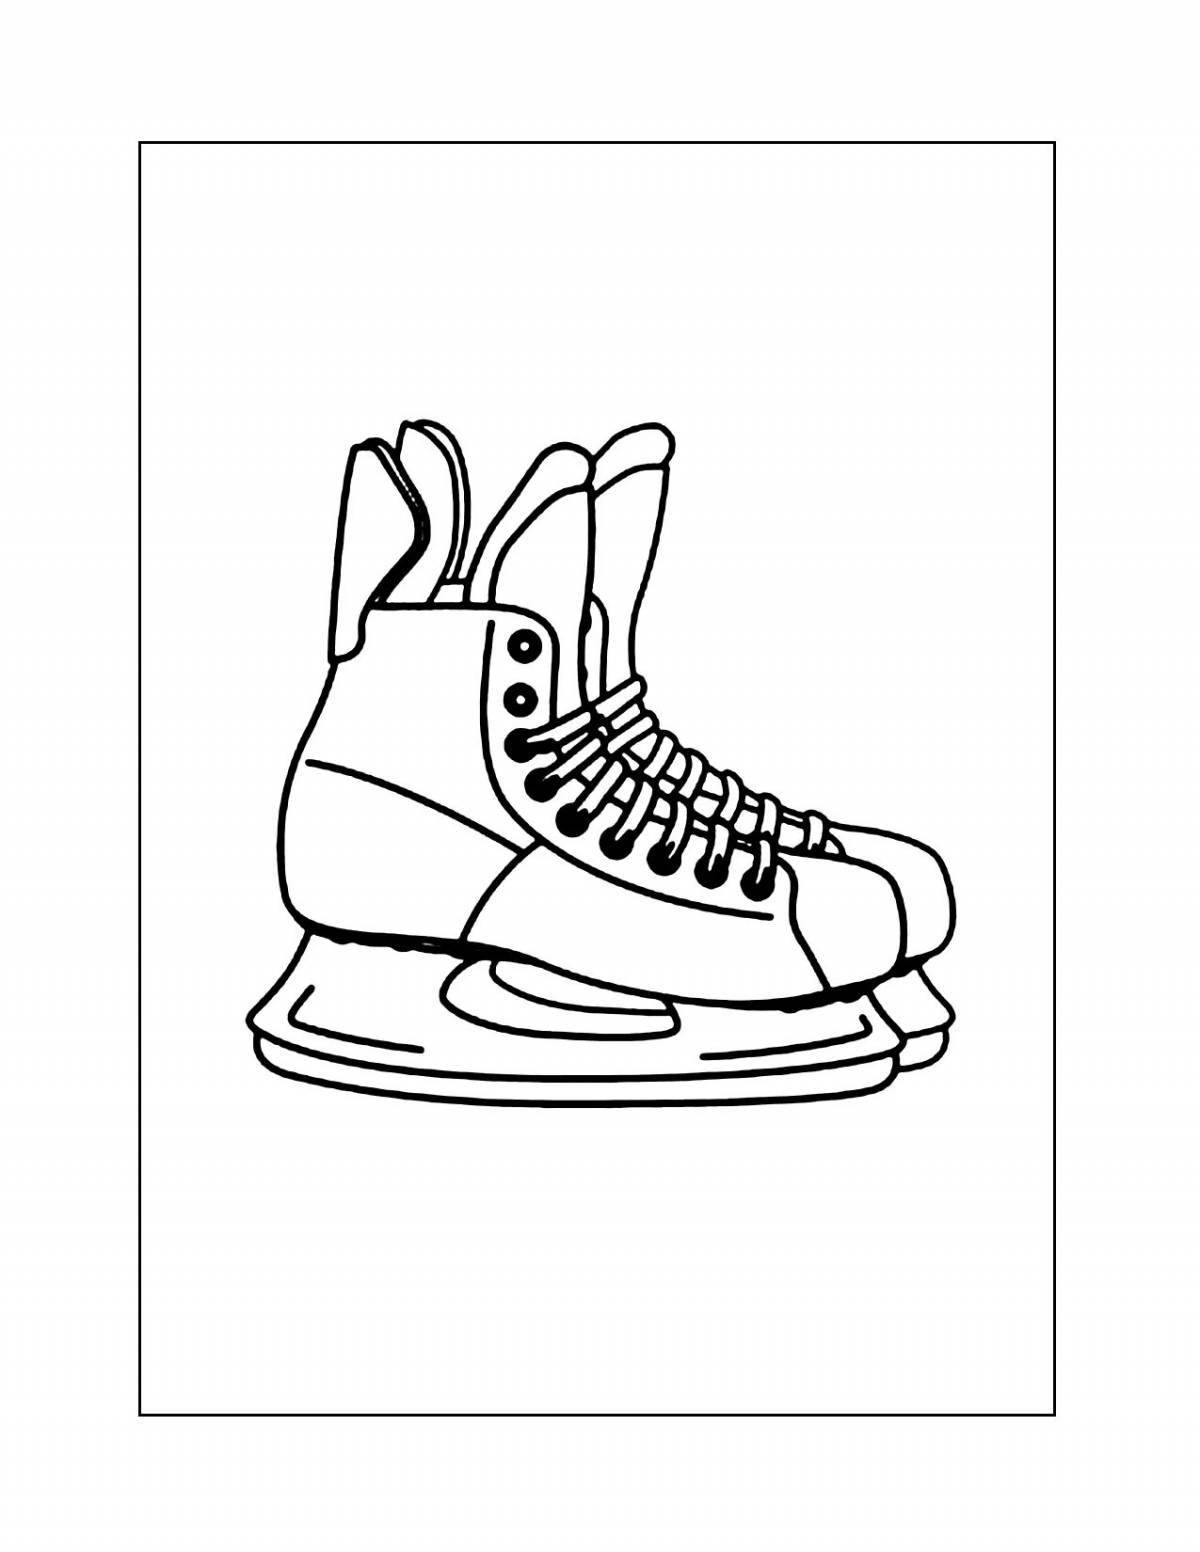 Adorable skate pattern coloring page